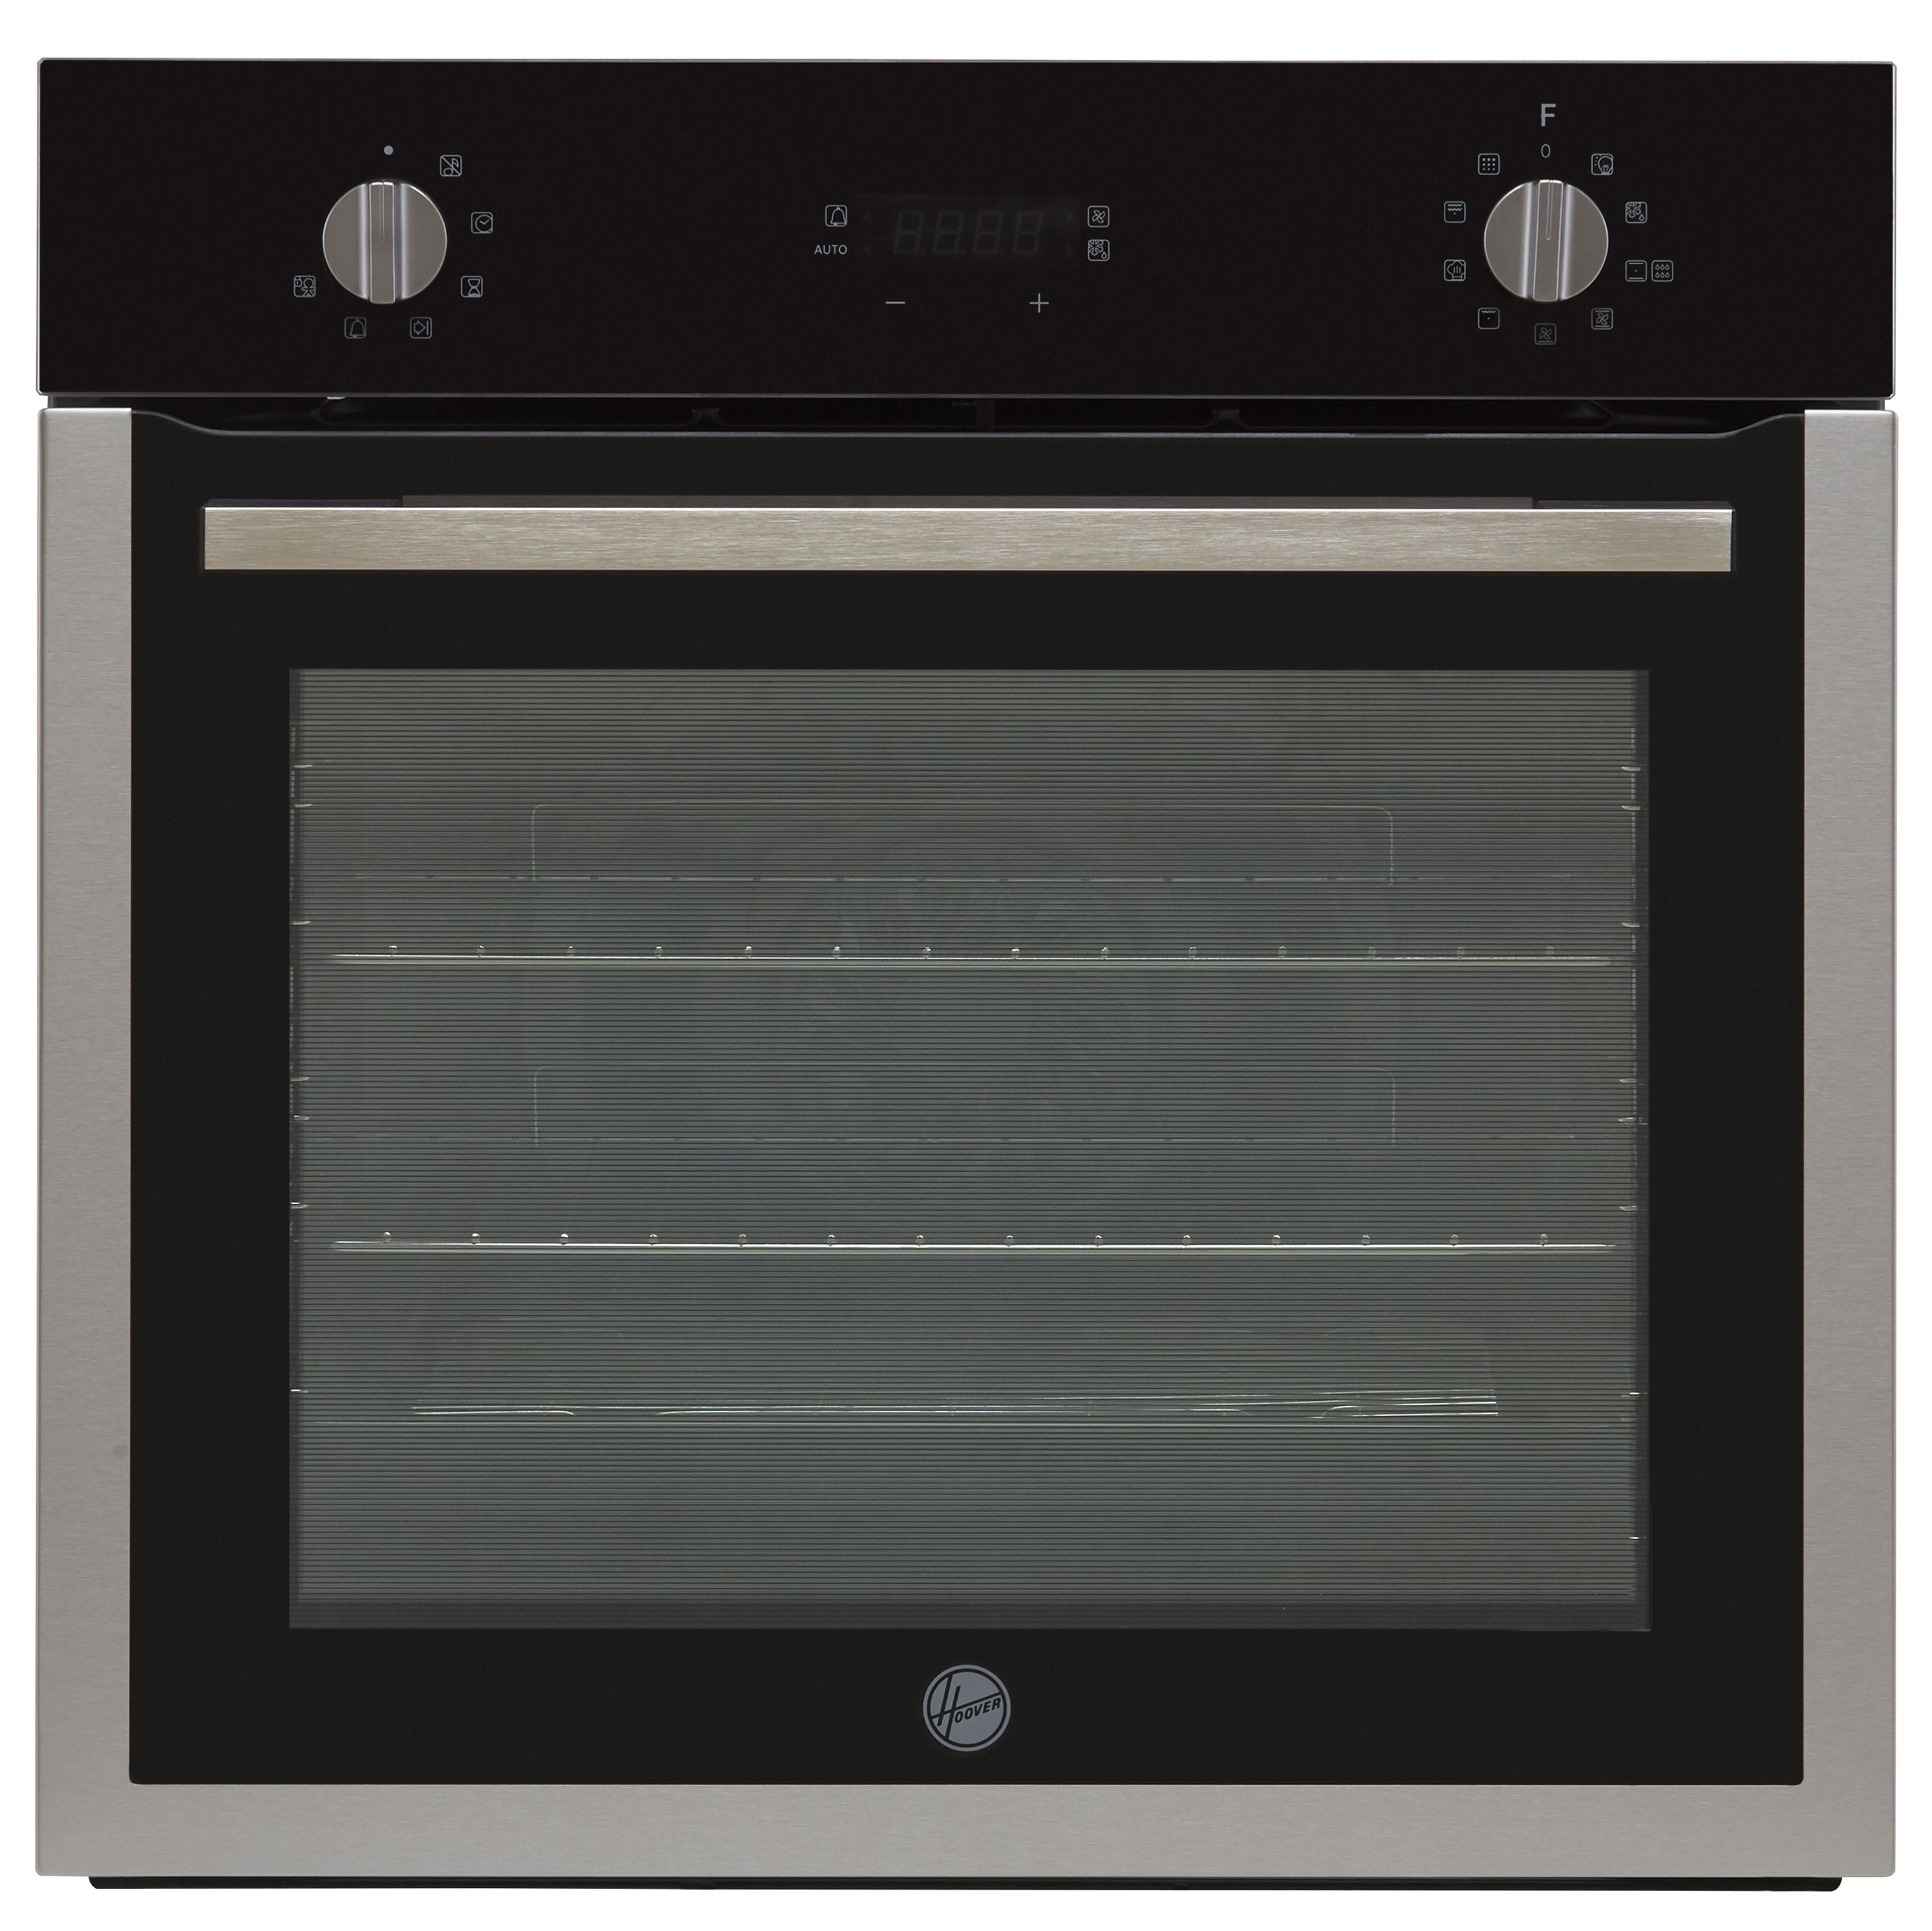 Hoover H-OVEN 300 HOC3UB5858BI Built In Electric Single Oven and Pyrolytic Cleaning - Black / Stainless Steel - A Rated, Black